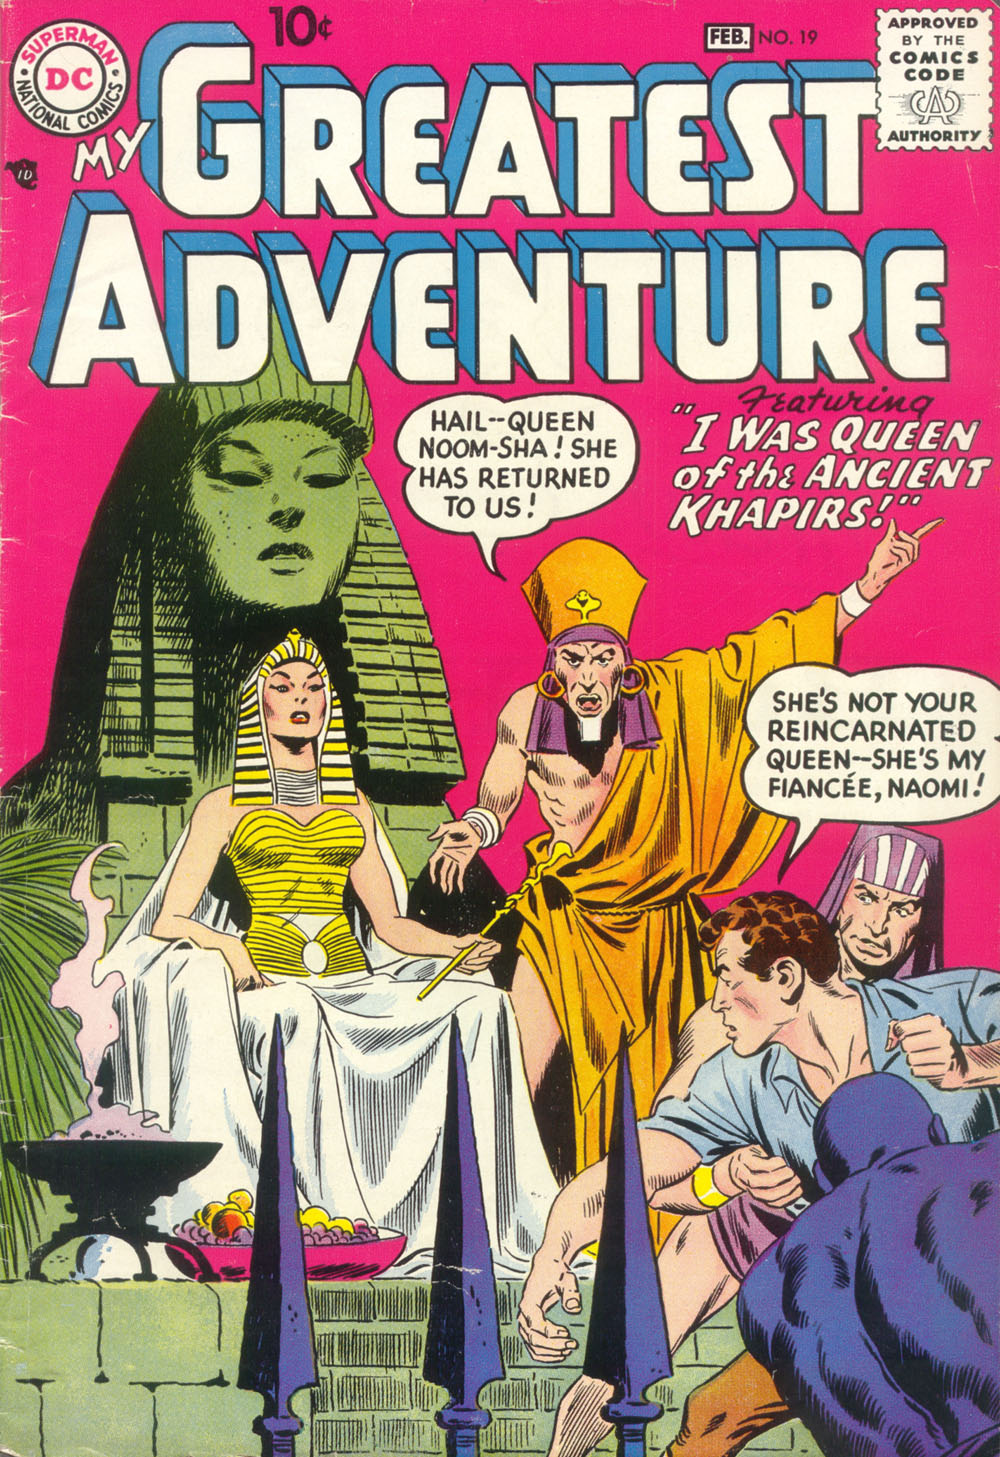 Read online My Greatest Adventure comic -  Issue #19 - 1